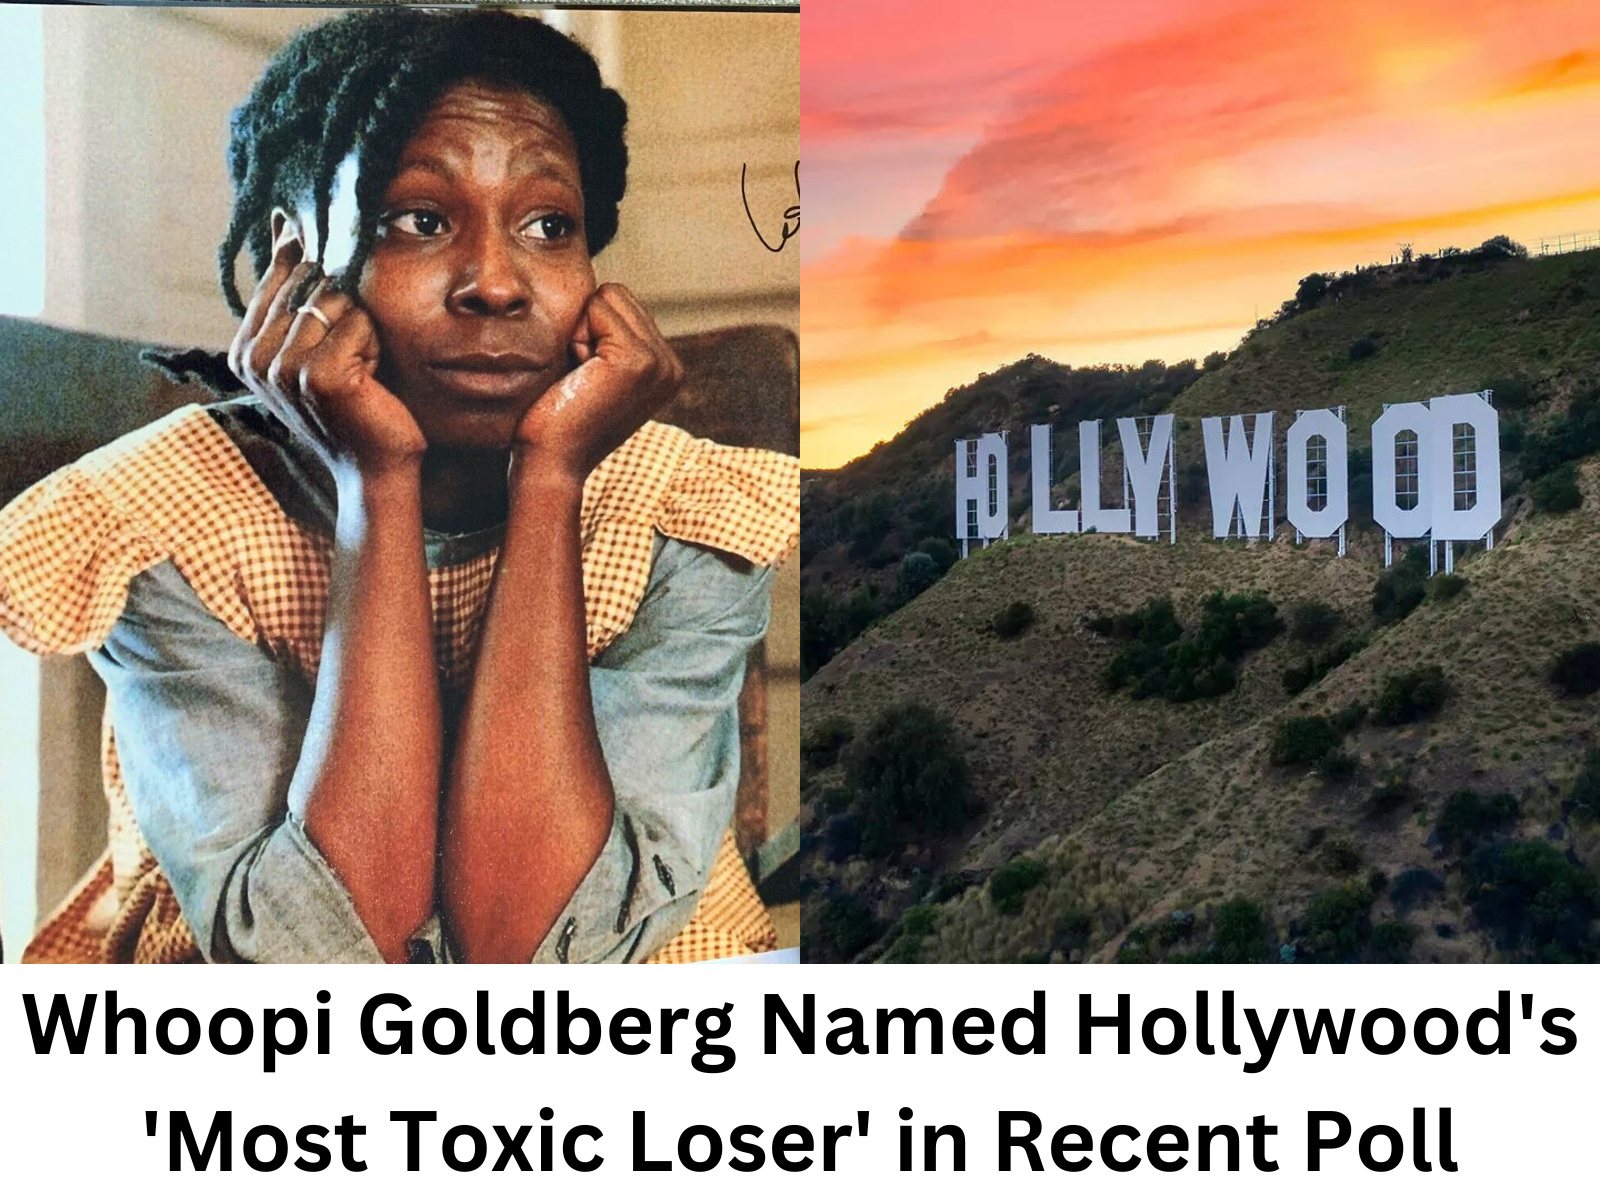 Whoopi Goldberg Crowned Hollywood’s ‘Most Toxic Loser’ in Unprecedented Upset